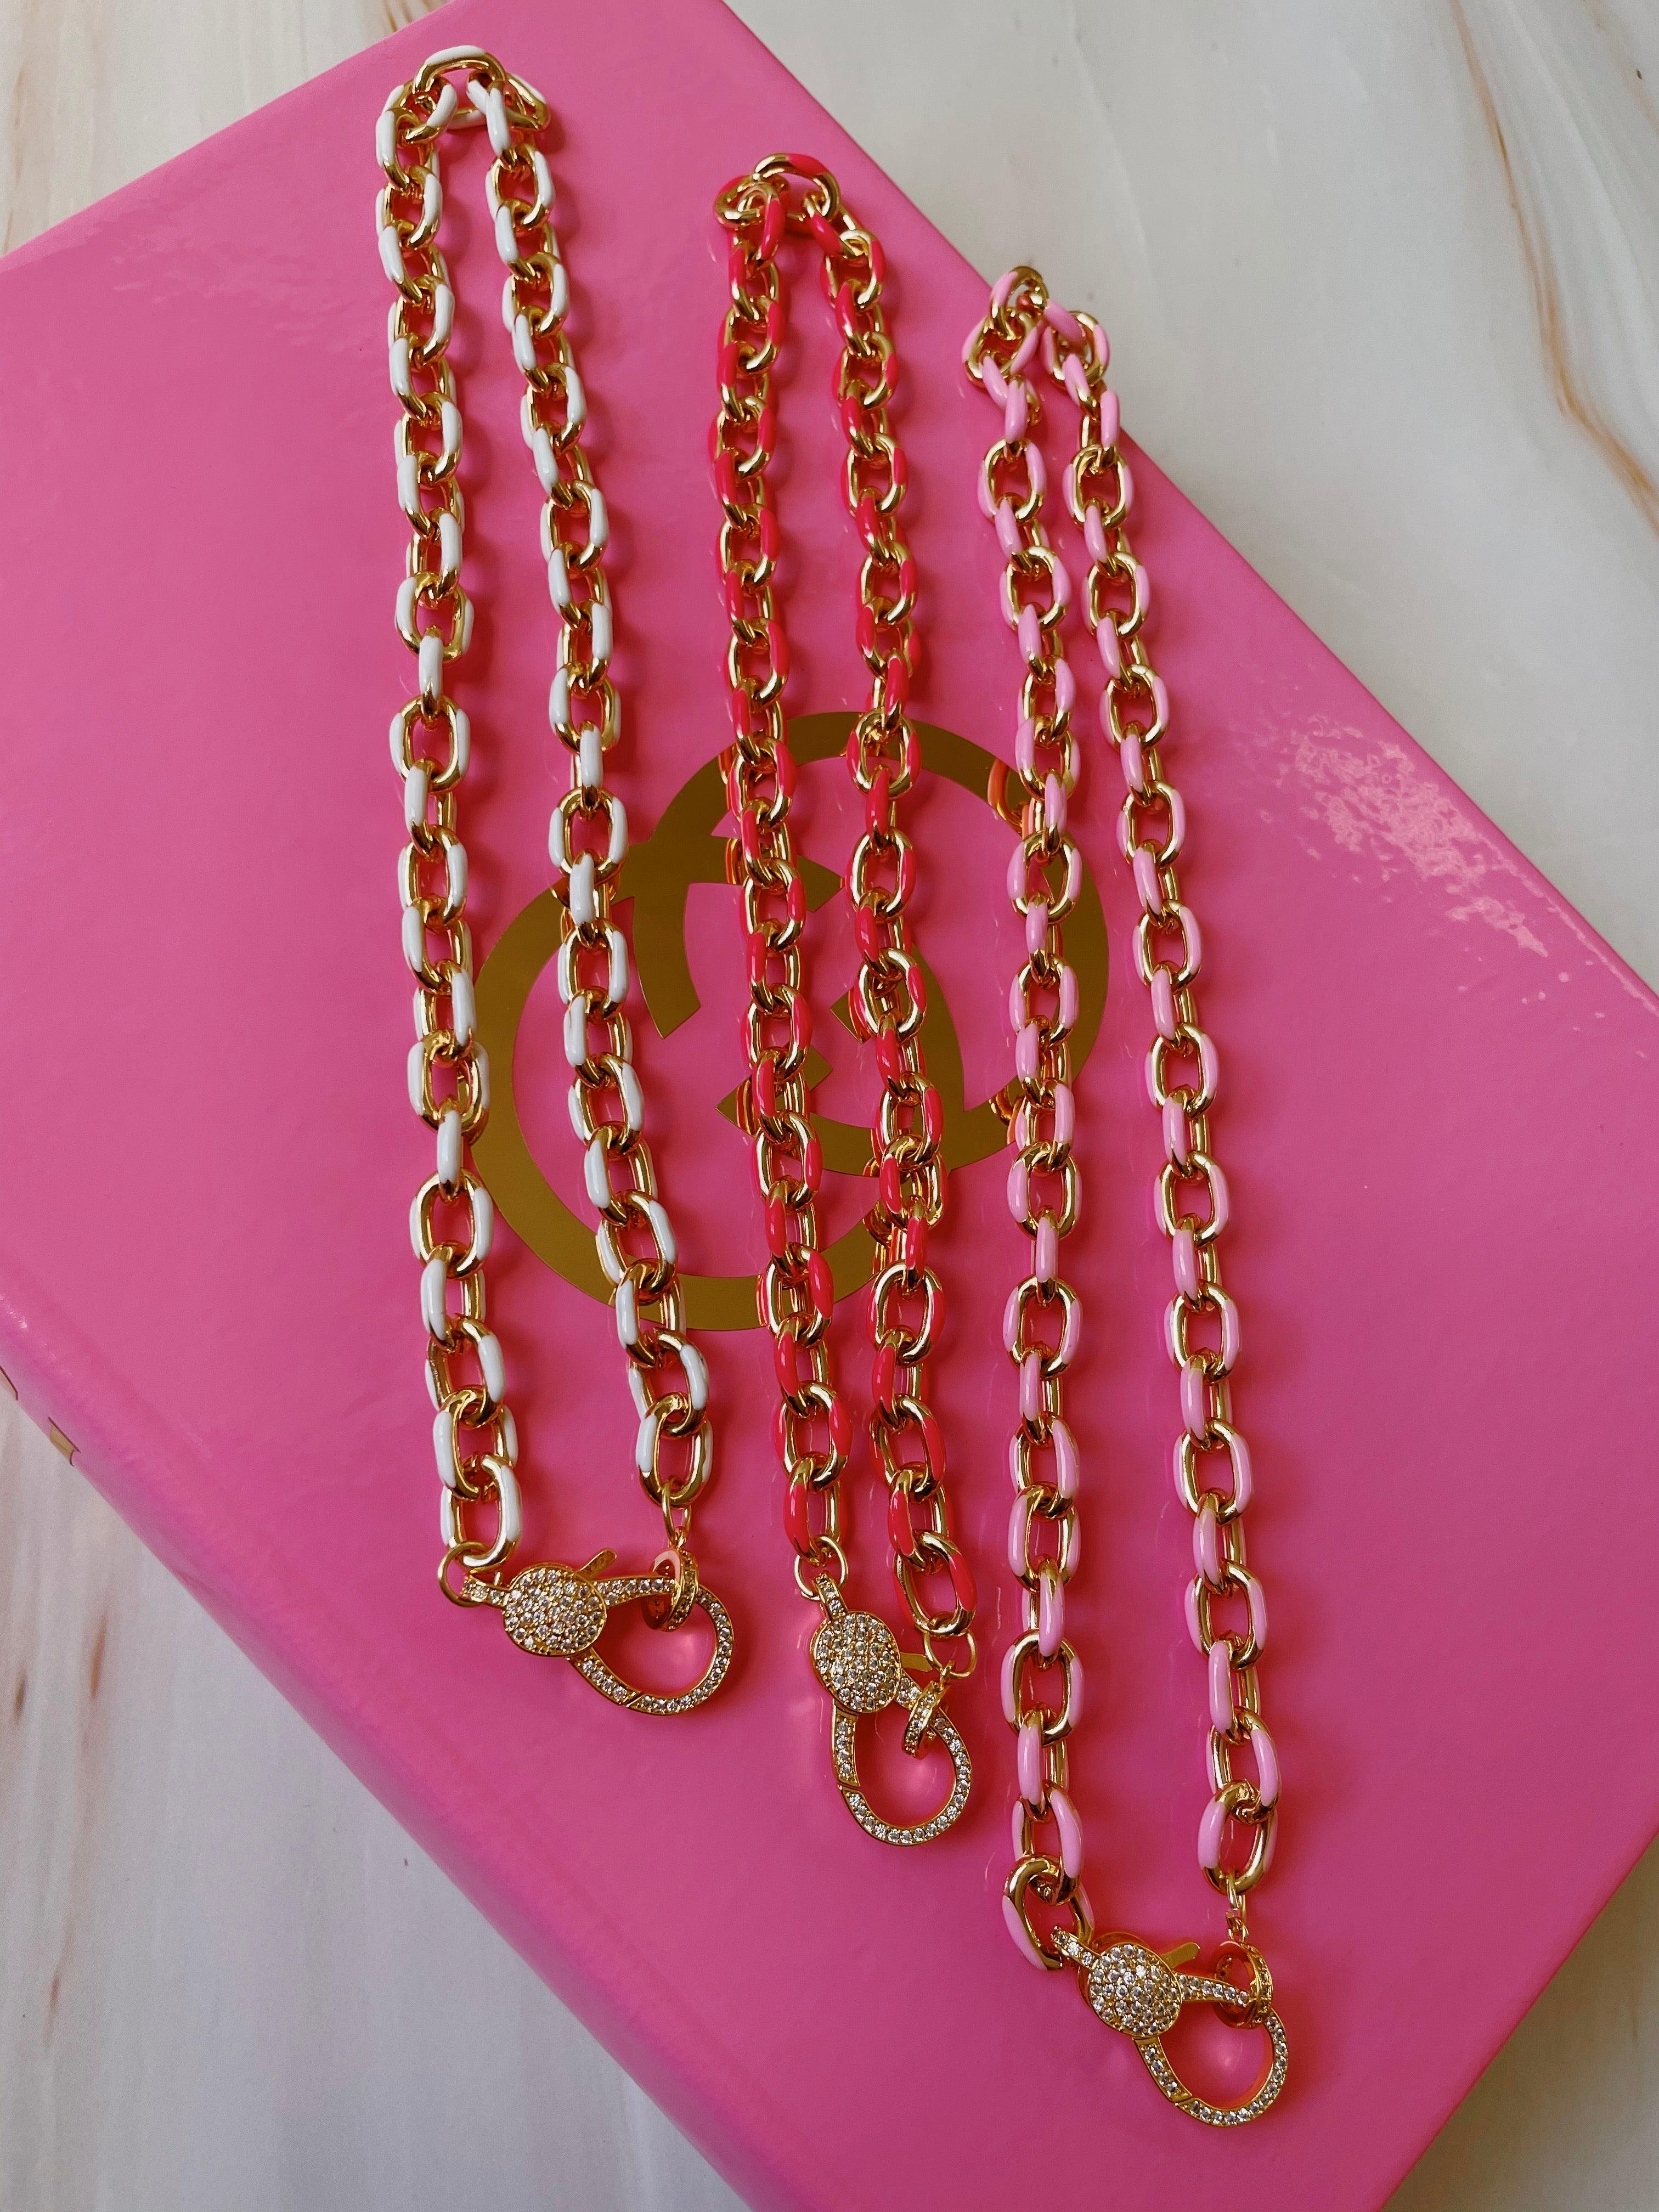 colorful chain clasp necklace